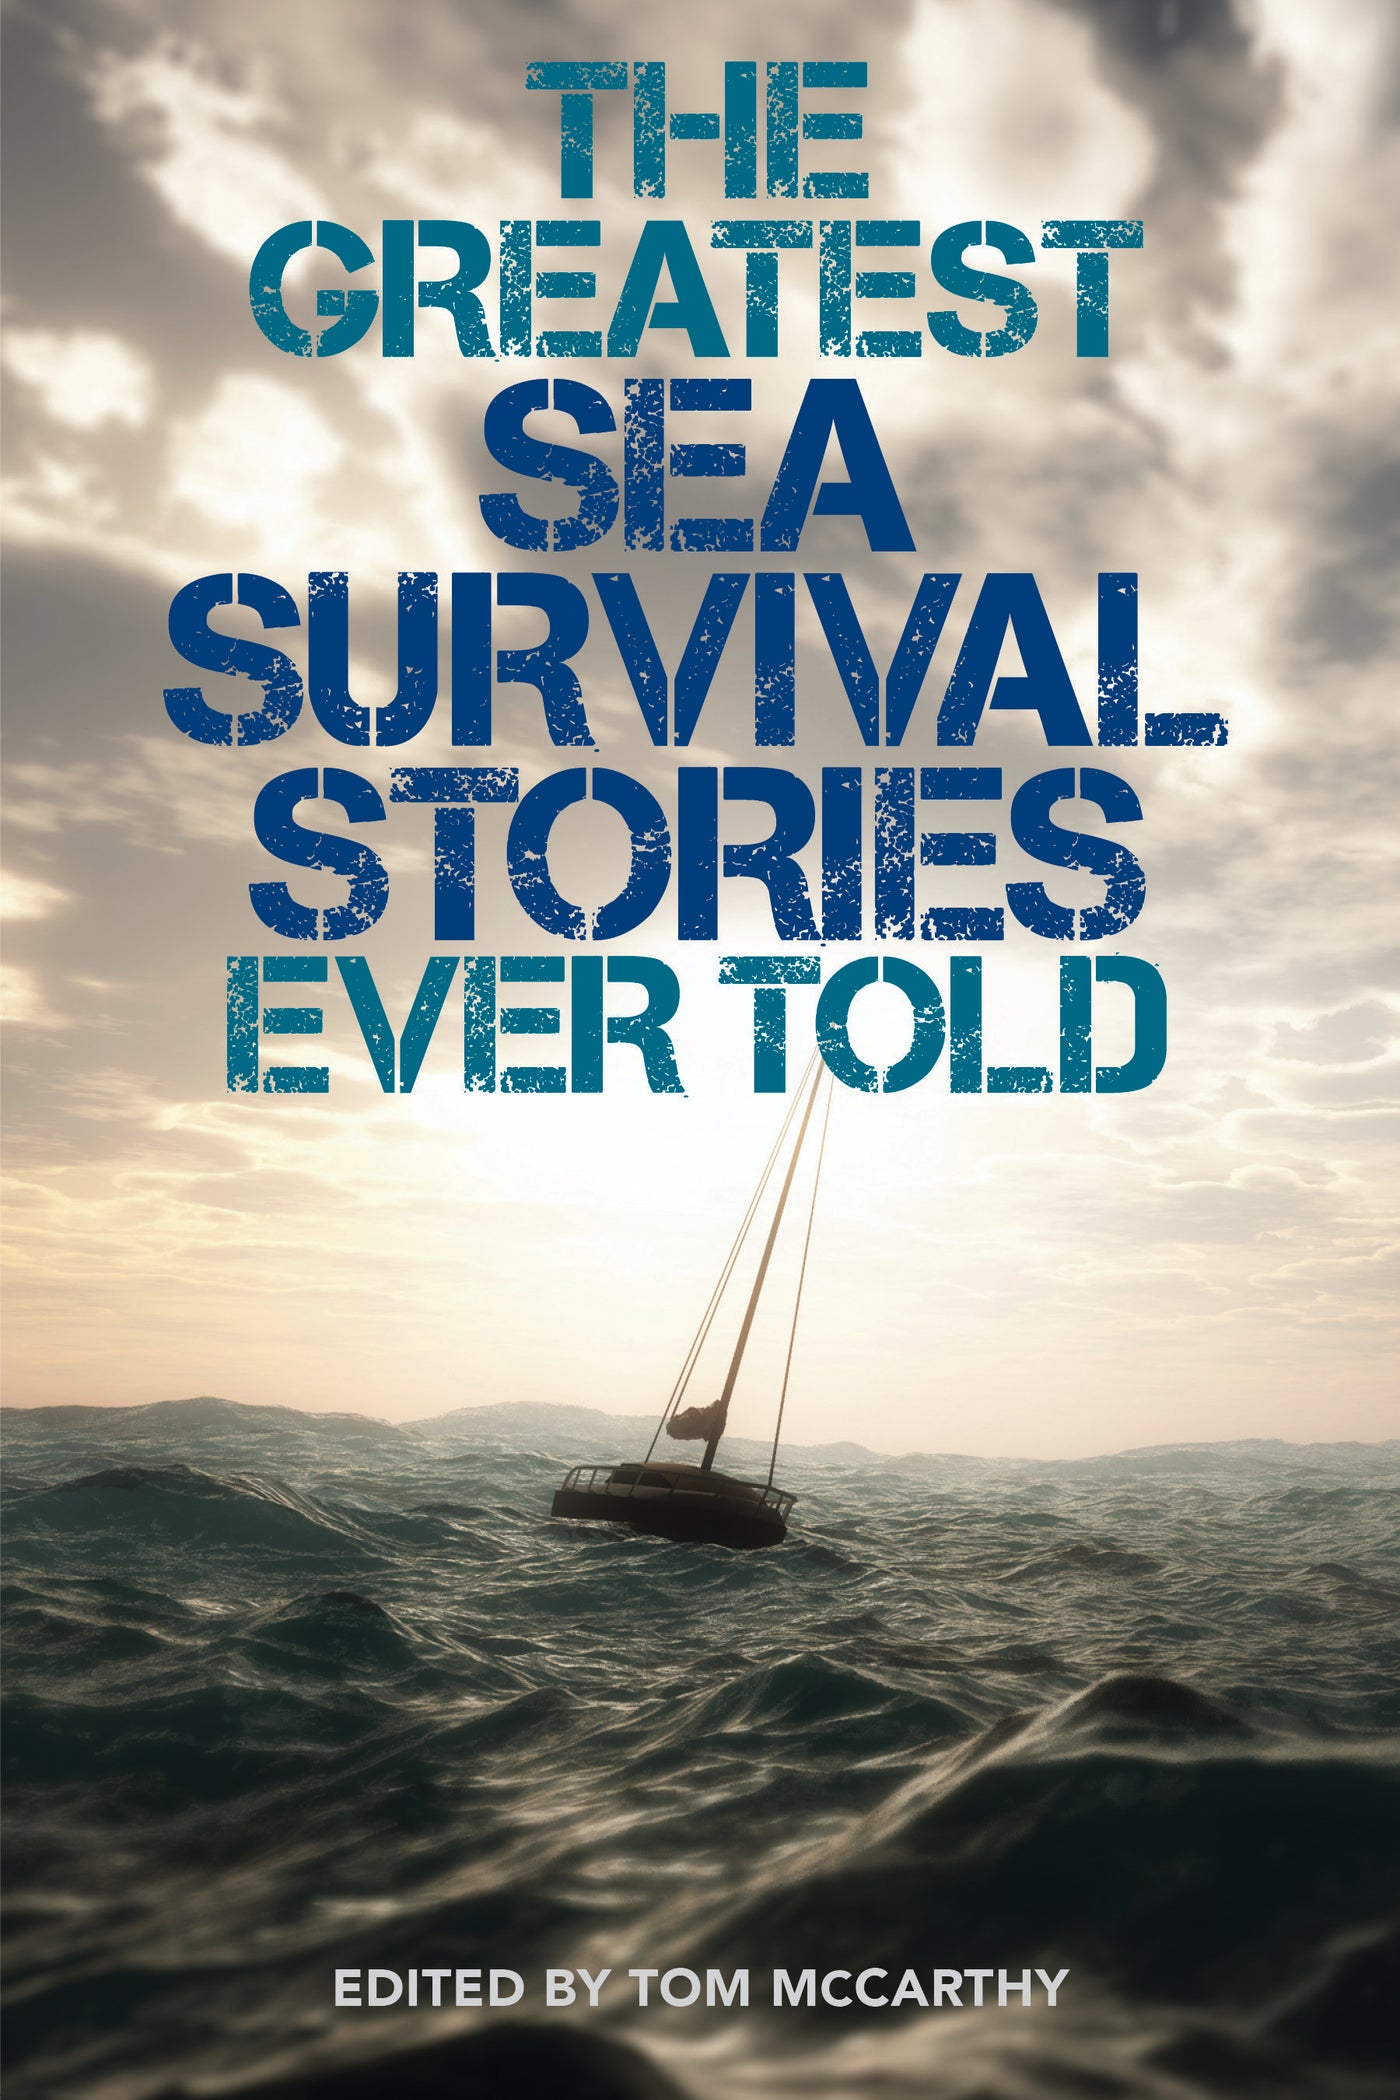 The Greatest Sea Survival Stories Ever Told